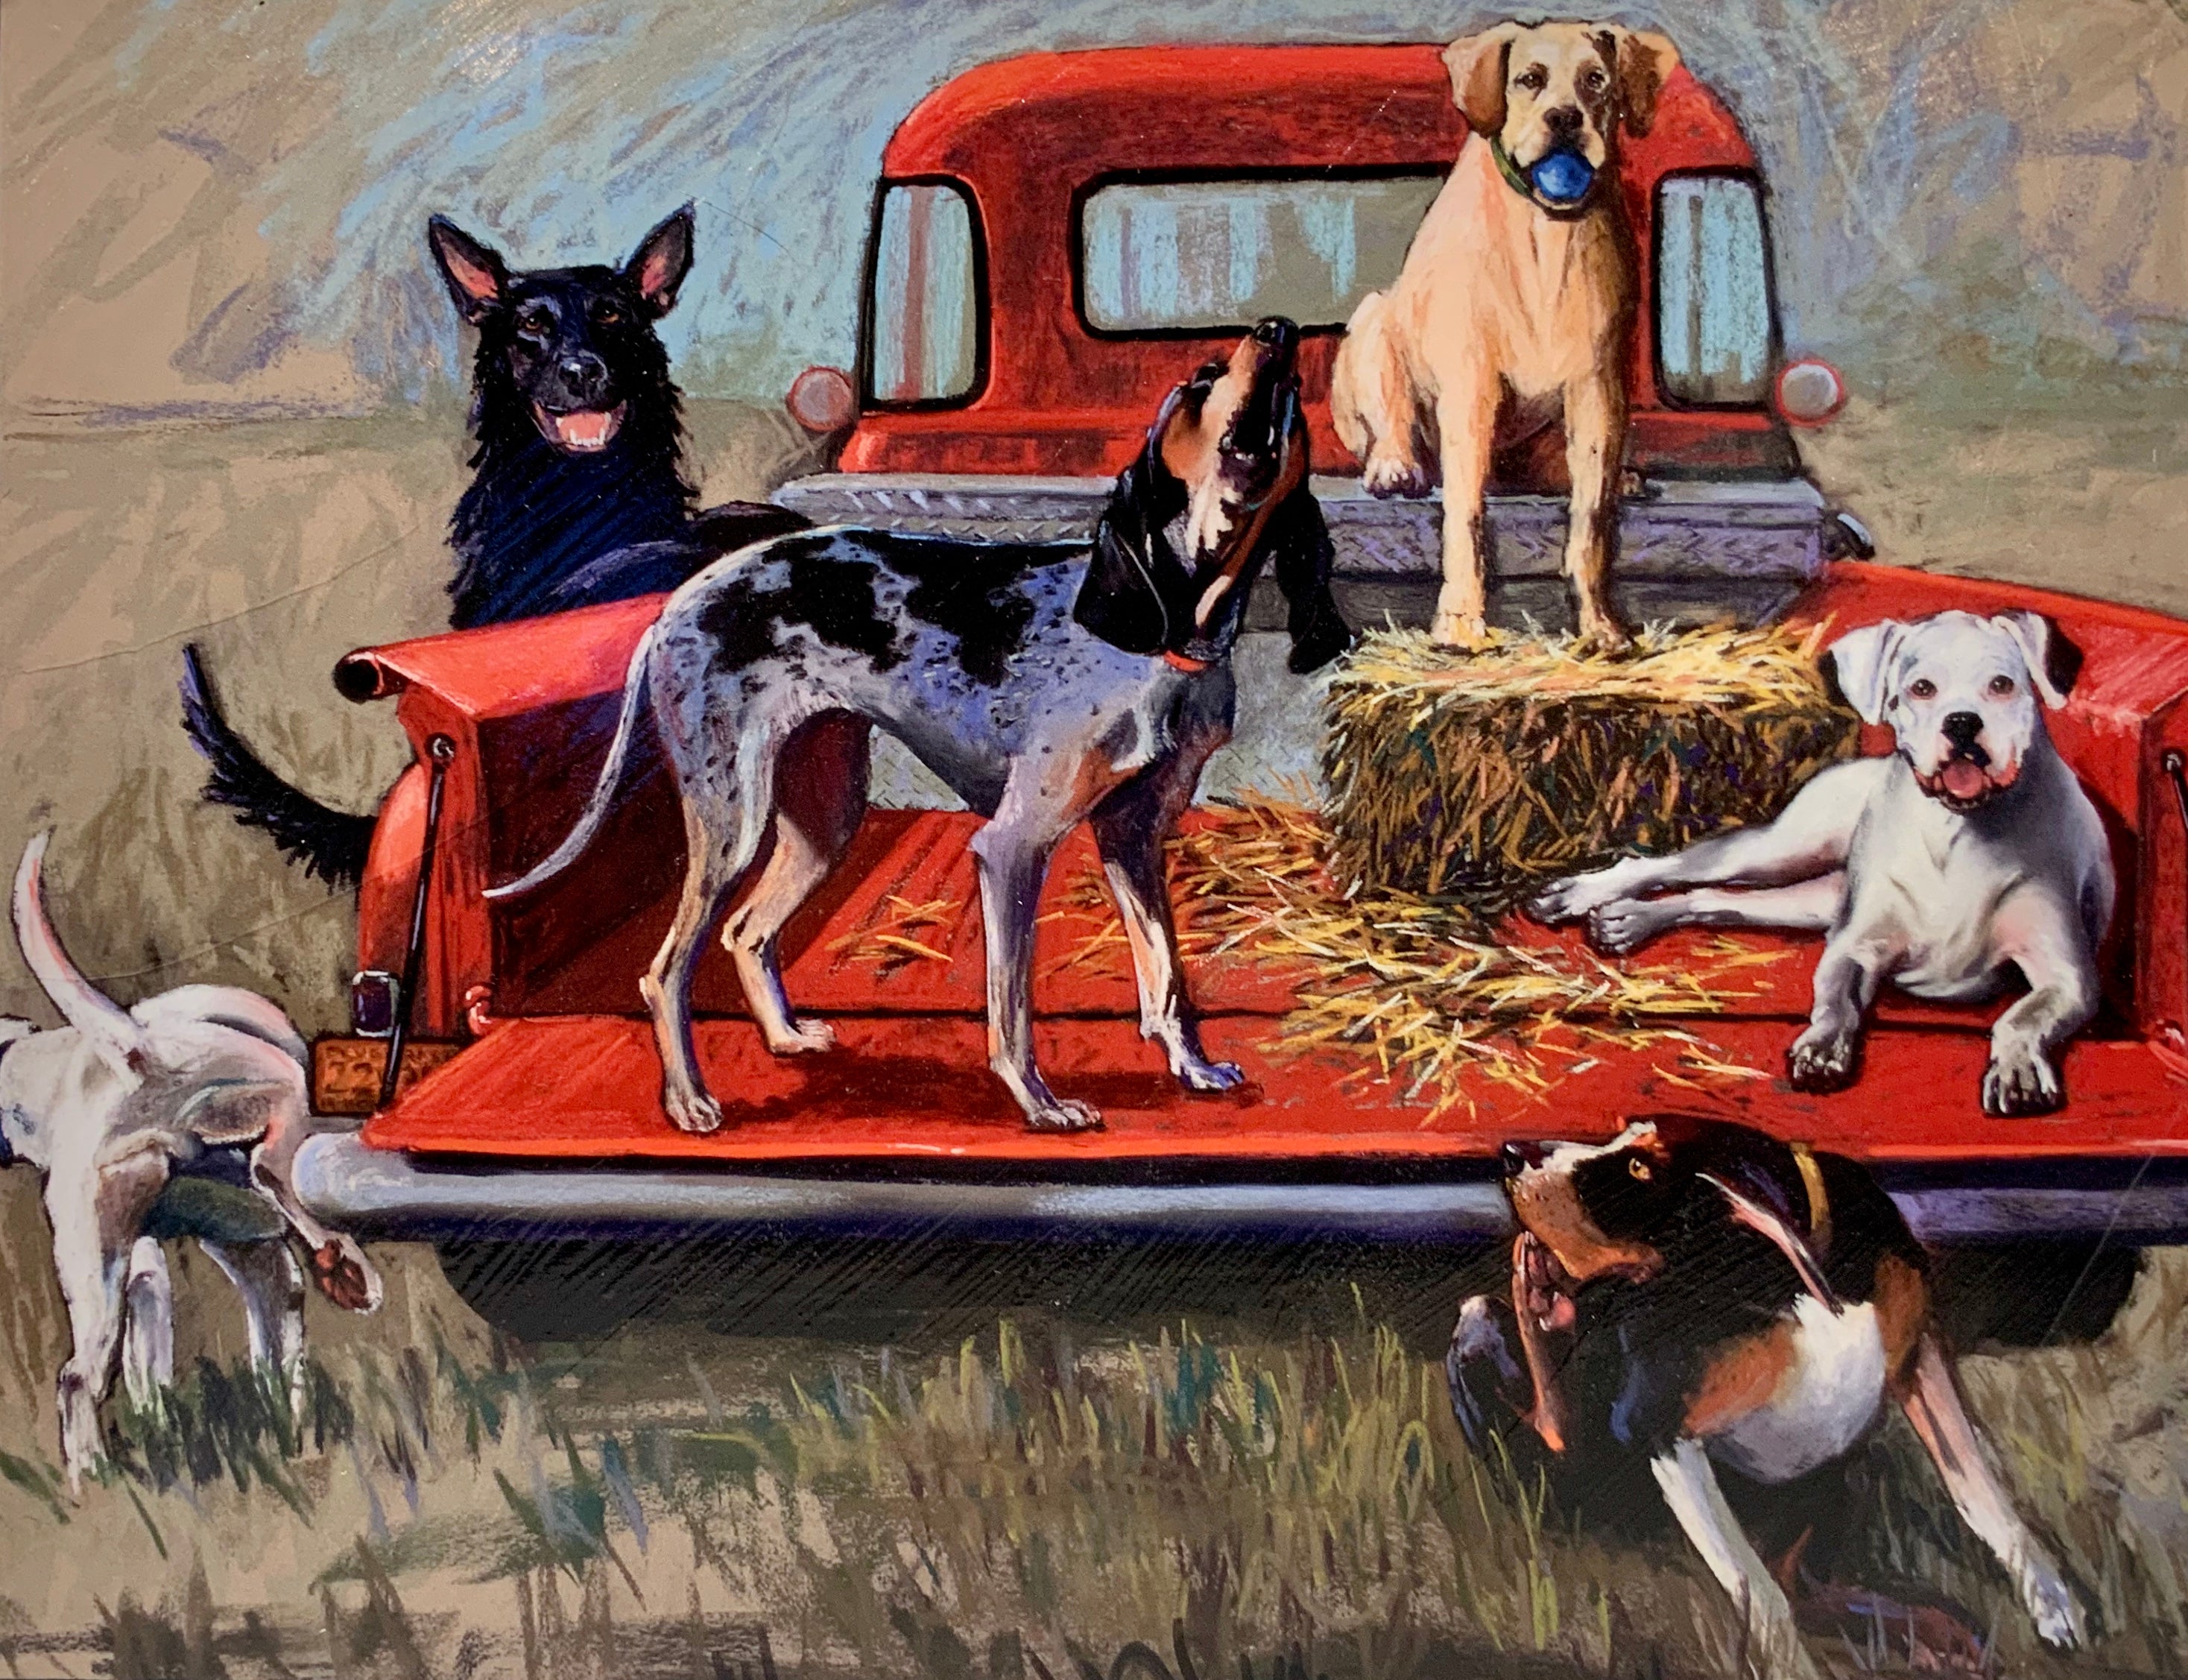 11X14 WOOD ART PRINT TAILGATE PARTY